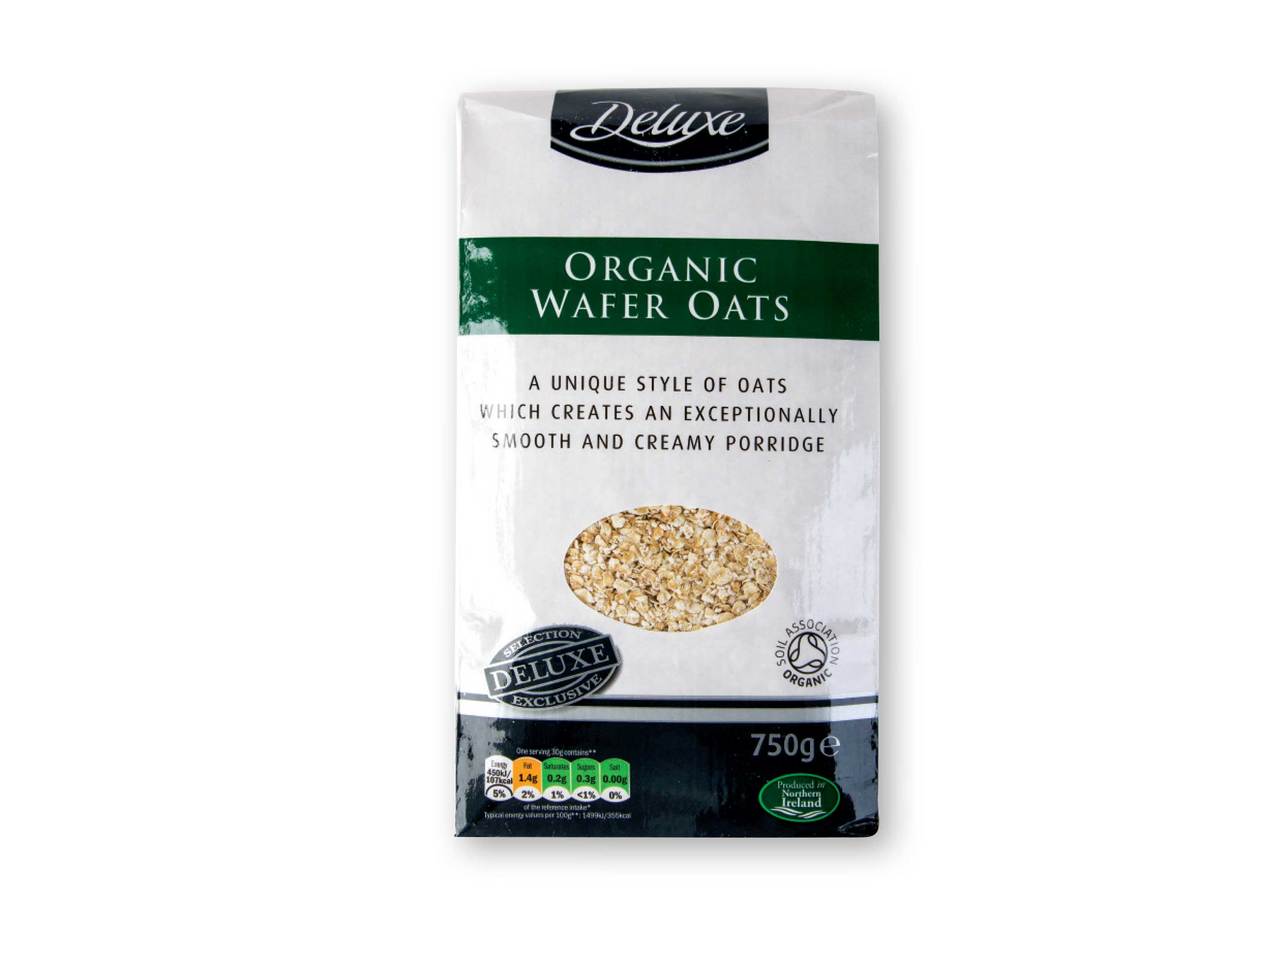 DELUXE Organic Wafer Oats